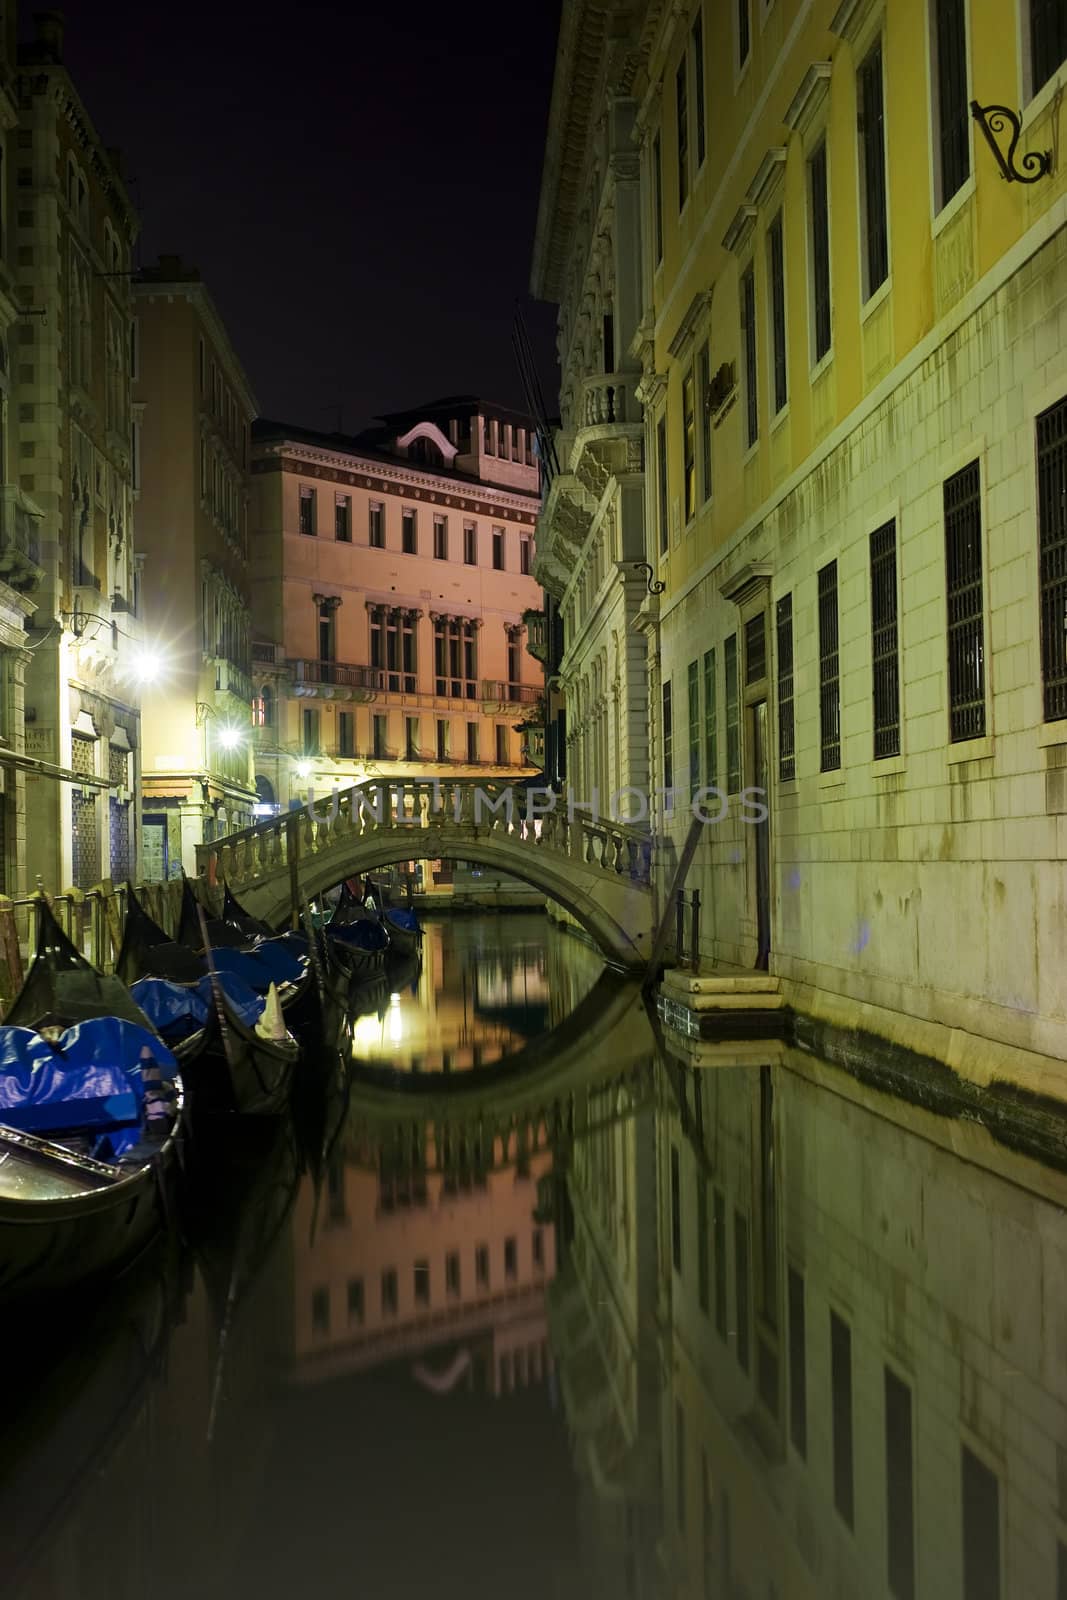 a small canal in the world famous town of Venice. In the foreground some typical boats and in the background a small bridge.